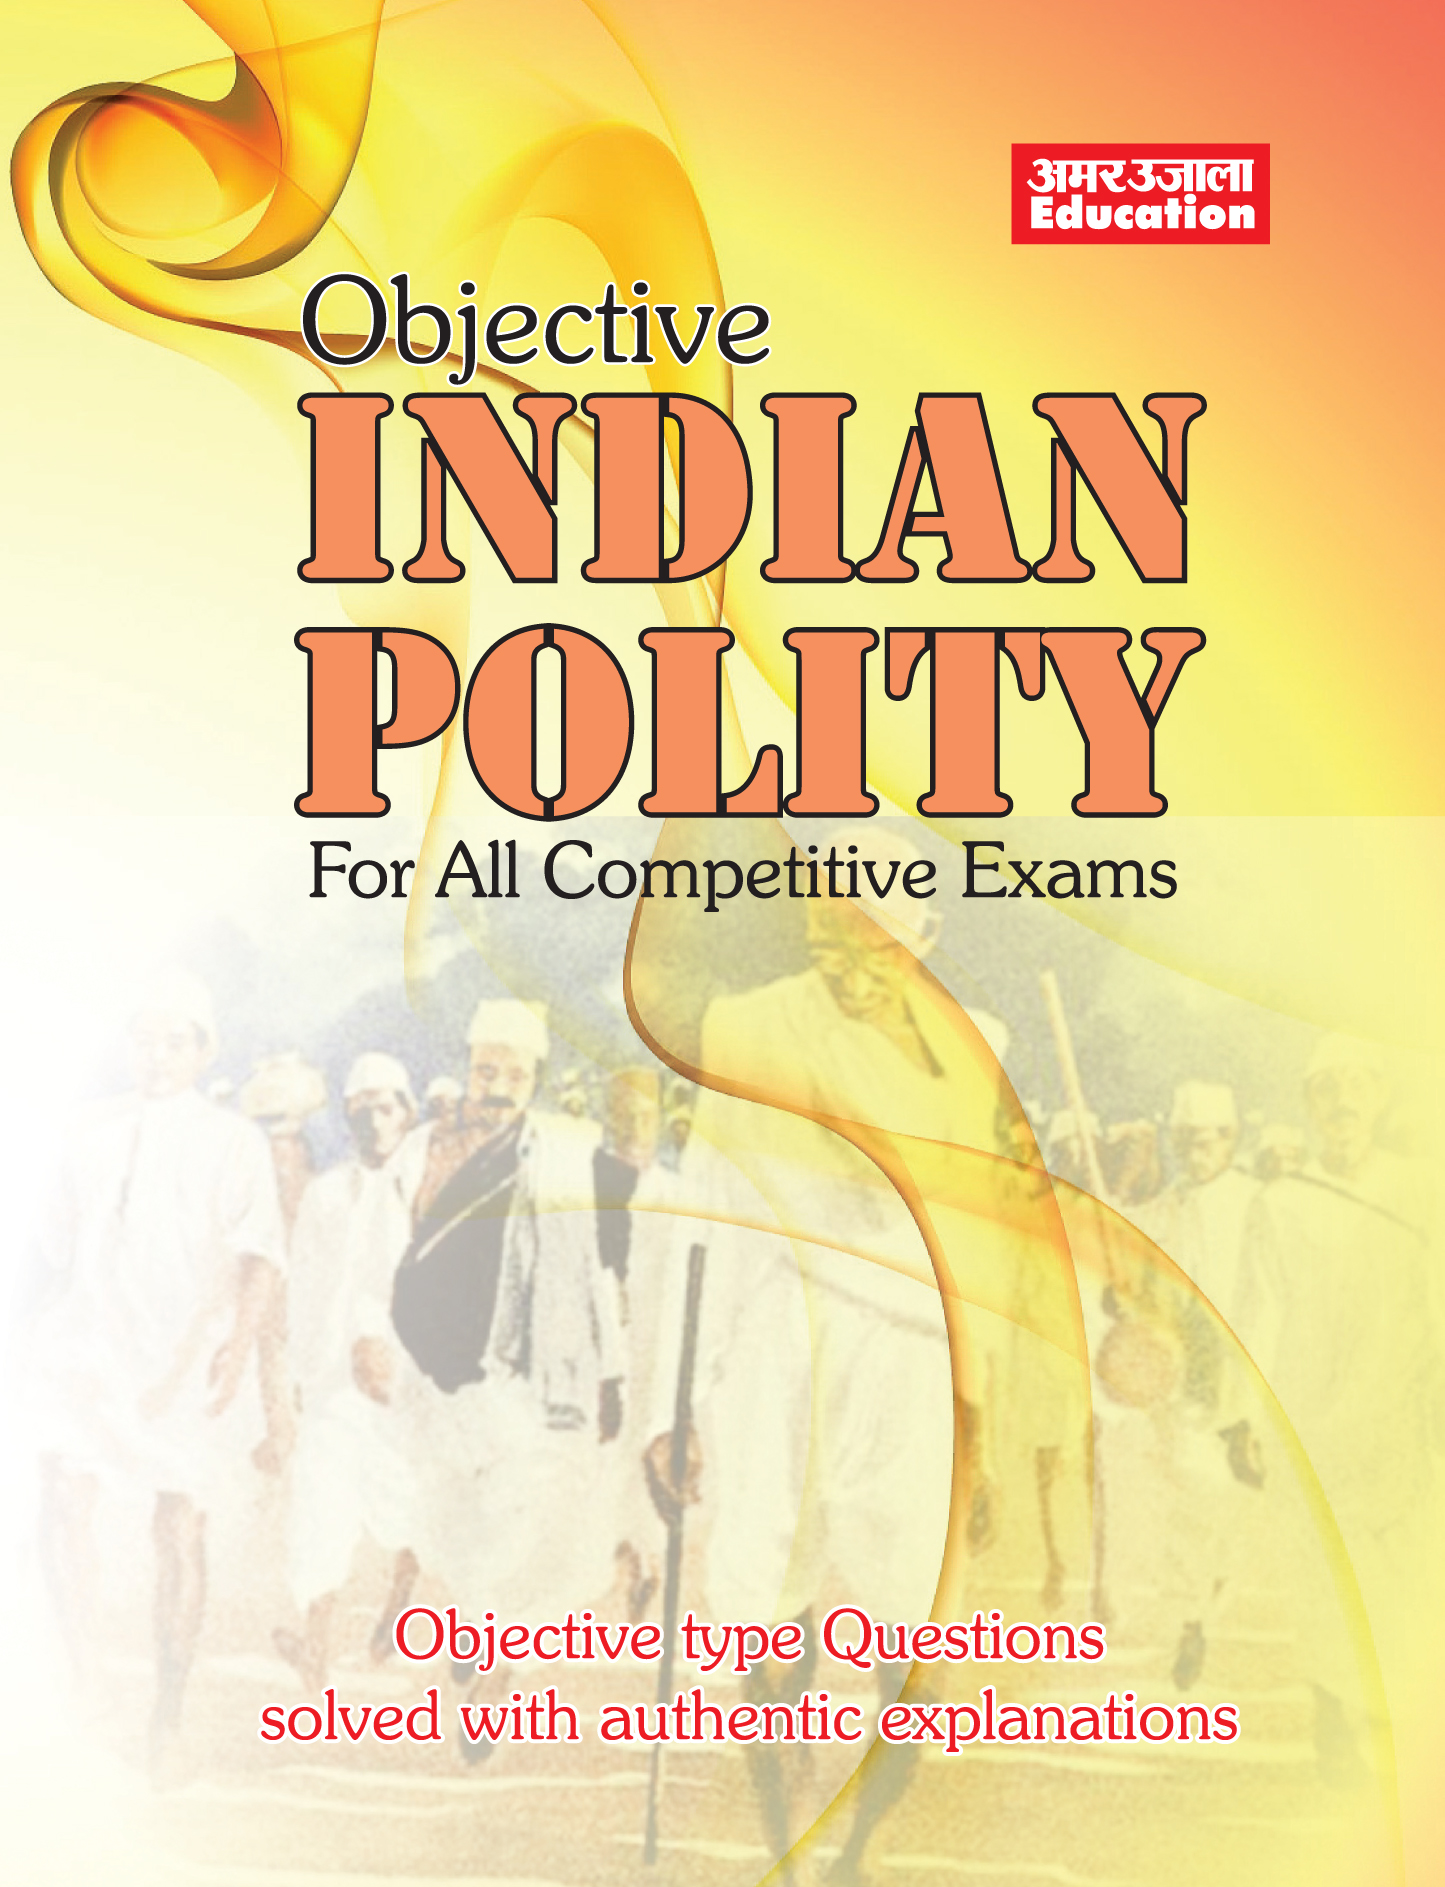 Ncert-objective indian polity (english)